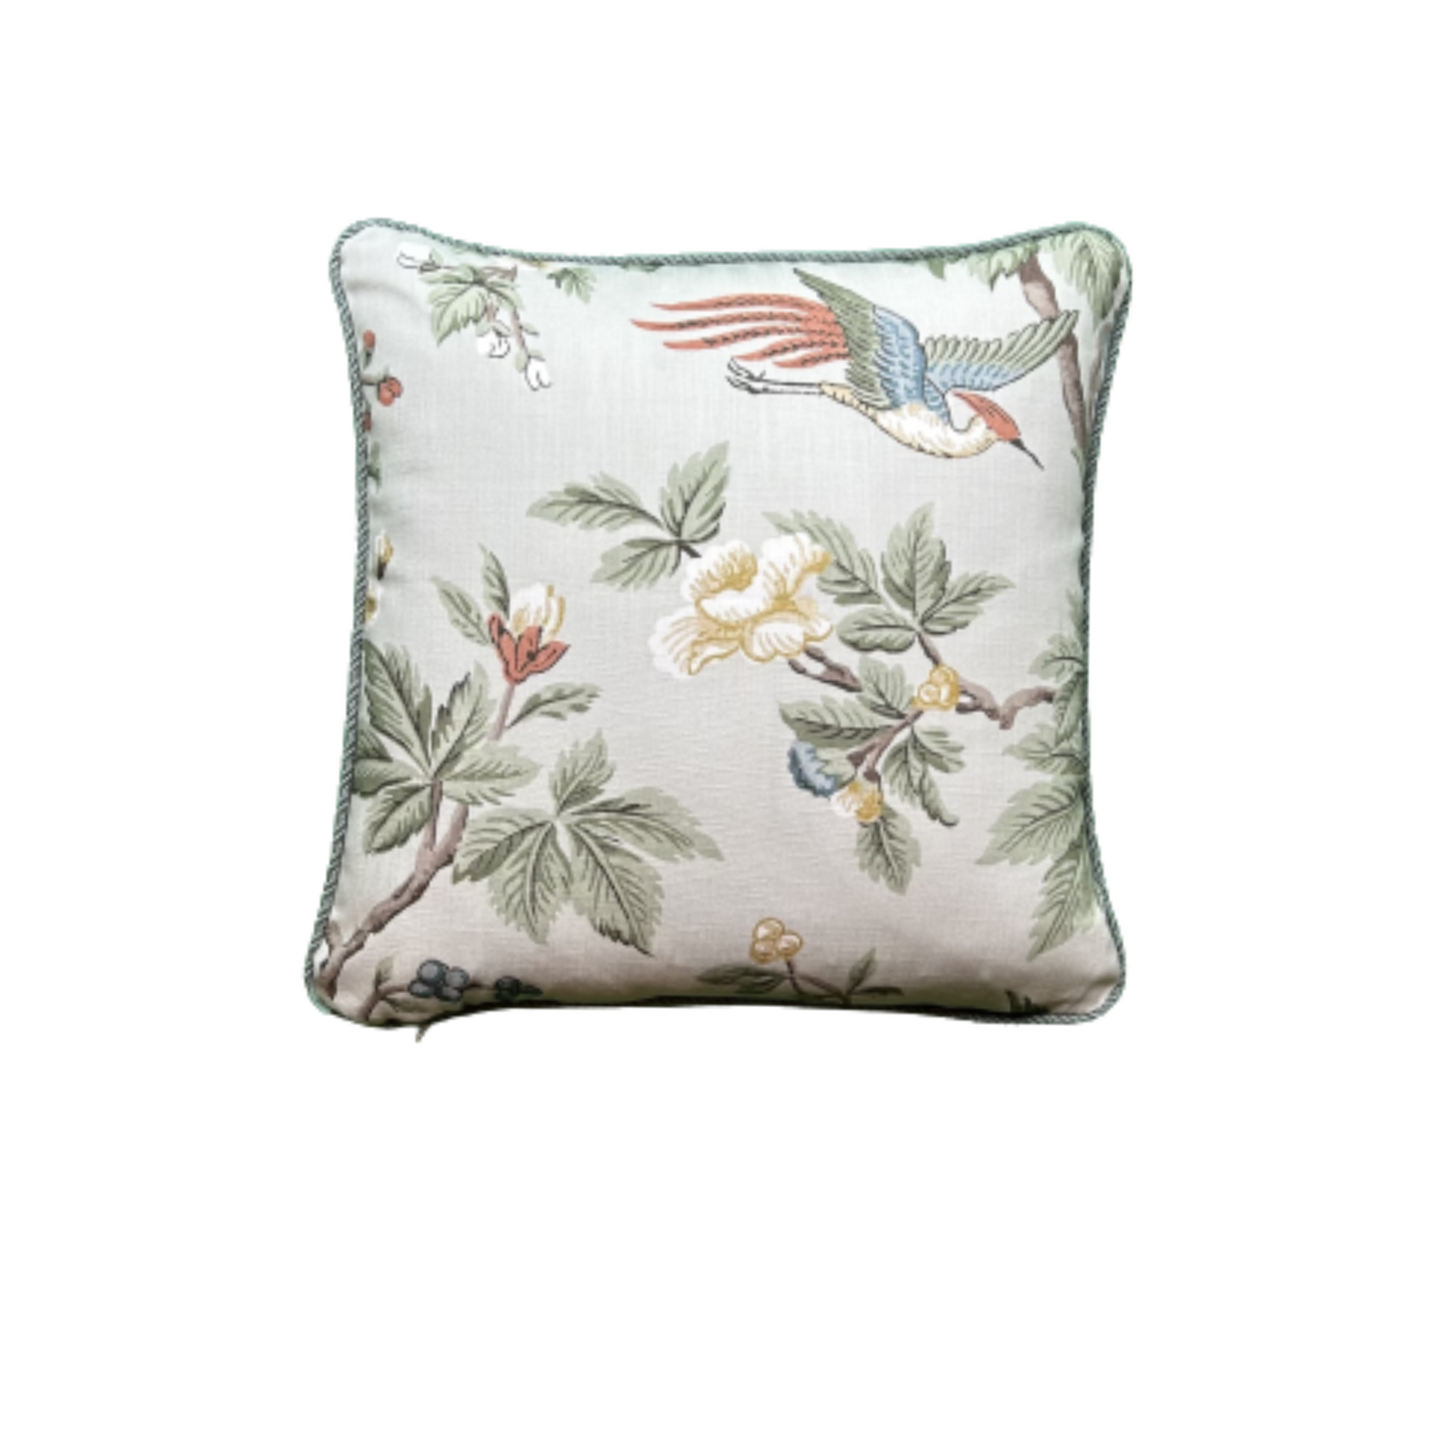 Lophura British National Trust 18 x 18 Decorative Pillow with Down Feather Insert